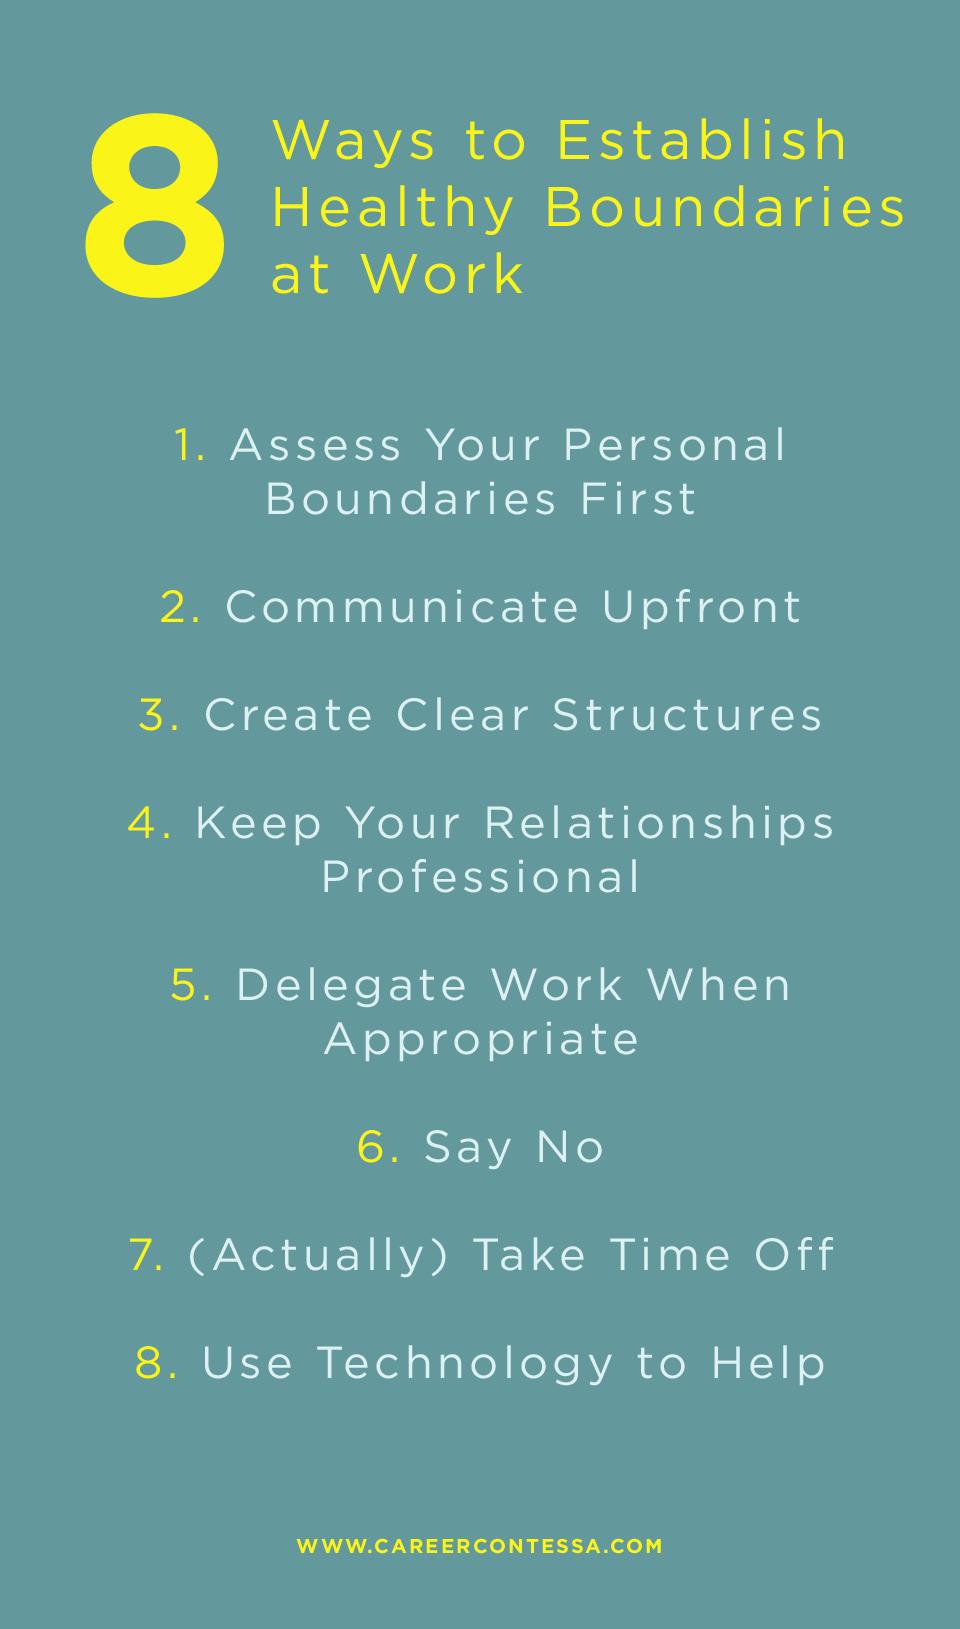 How Do I Set Boundaries at Work? Here Are Some Tips